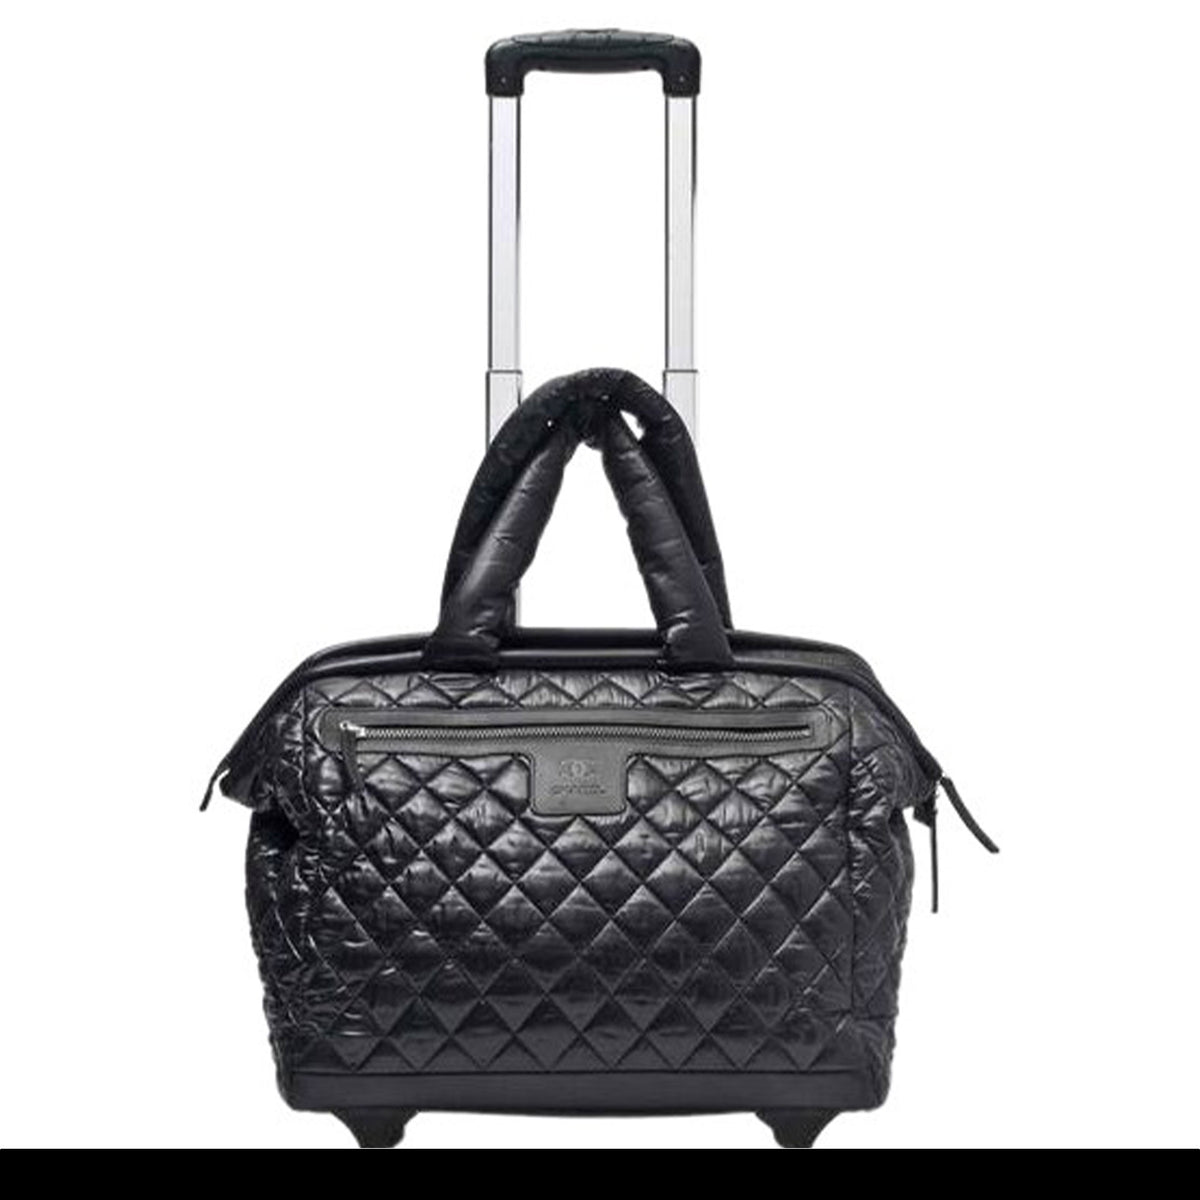 Chanel Coco Cocoon Travel Bag Auction